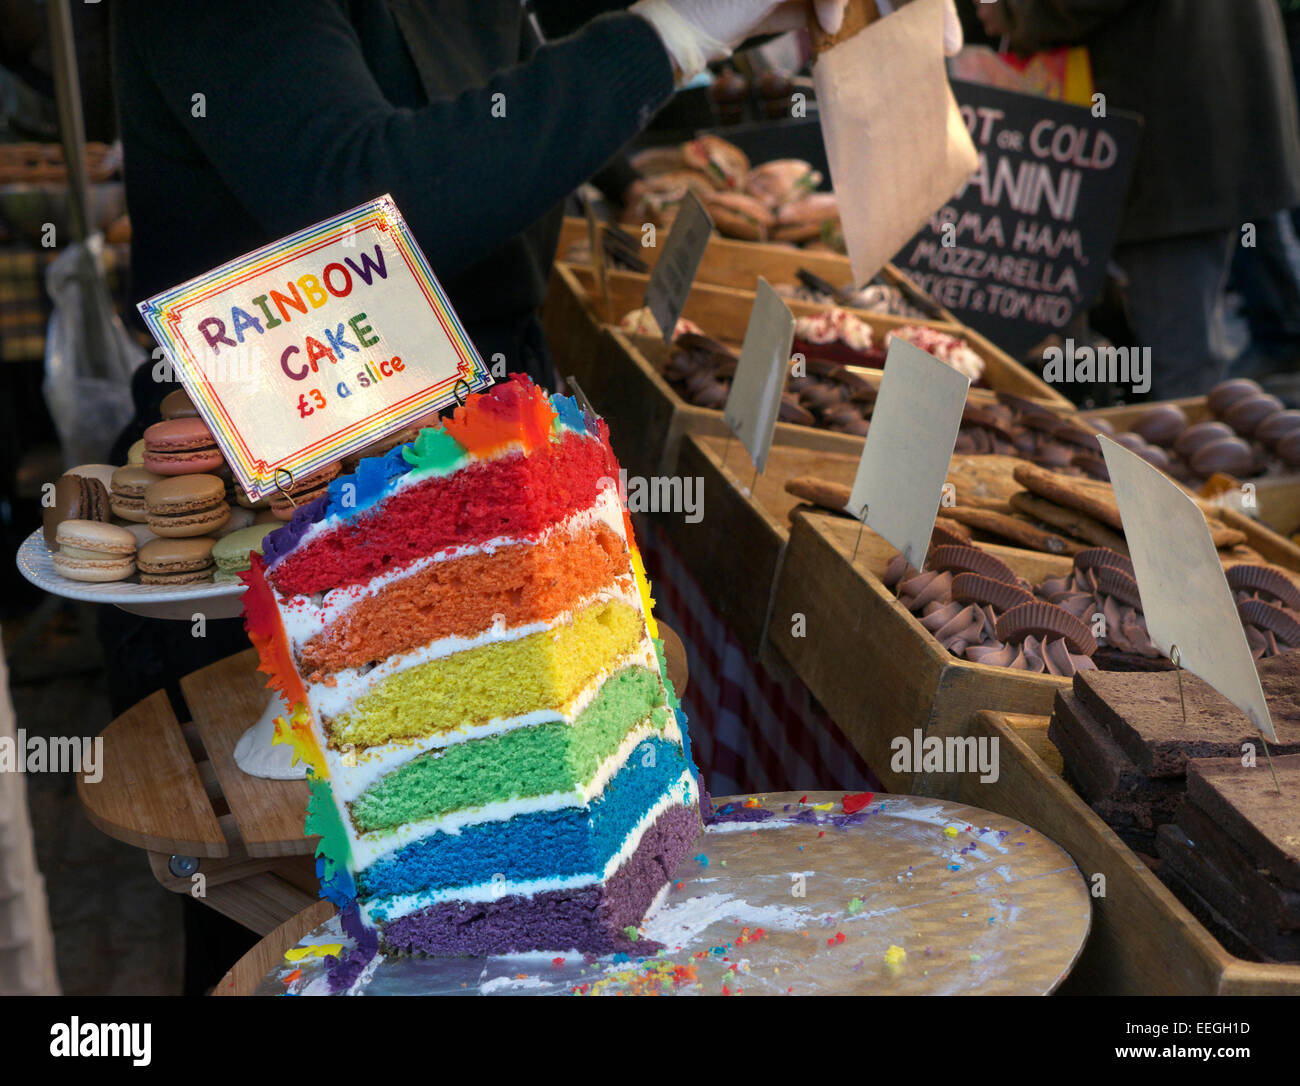 Rainbow layer cake display outdoor market stall on sale at Covent Garden piazza street food market stall London UK Stock Photo